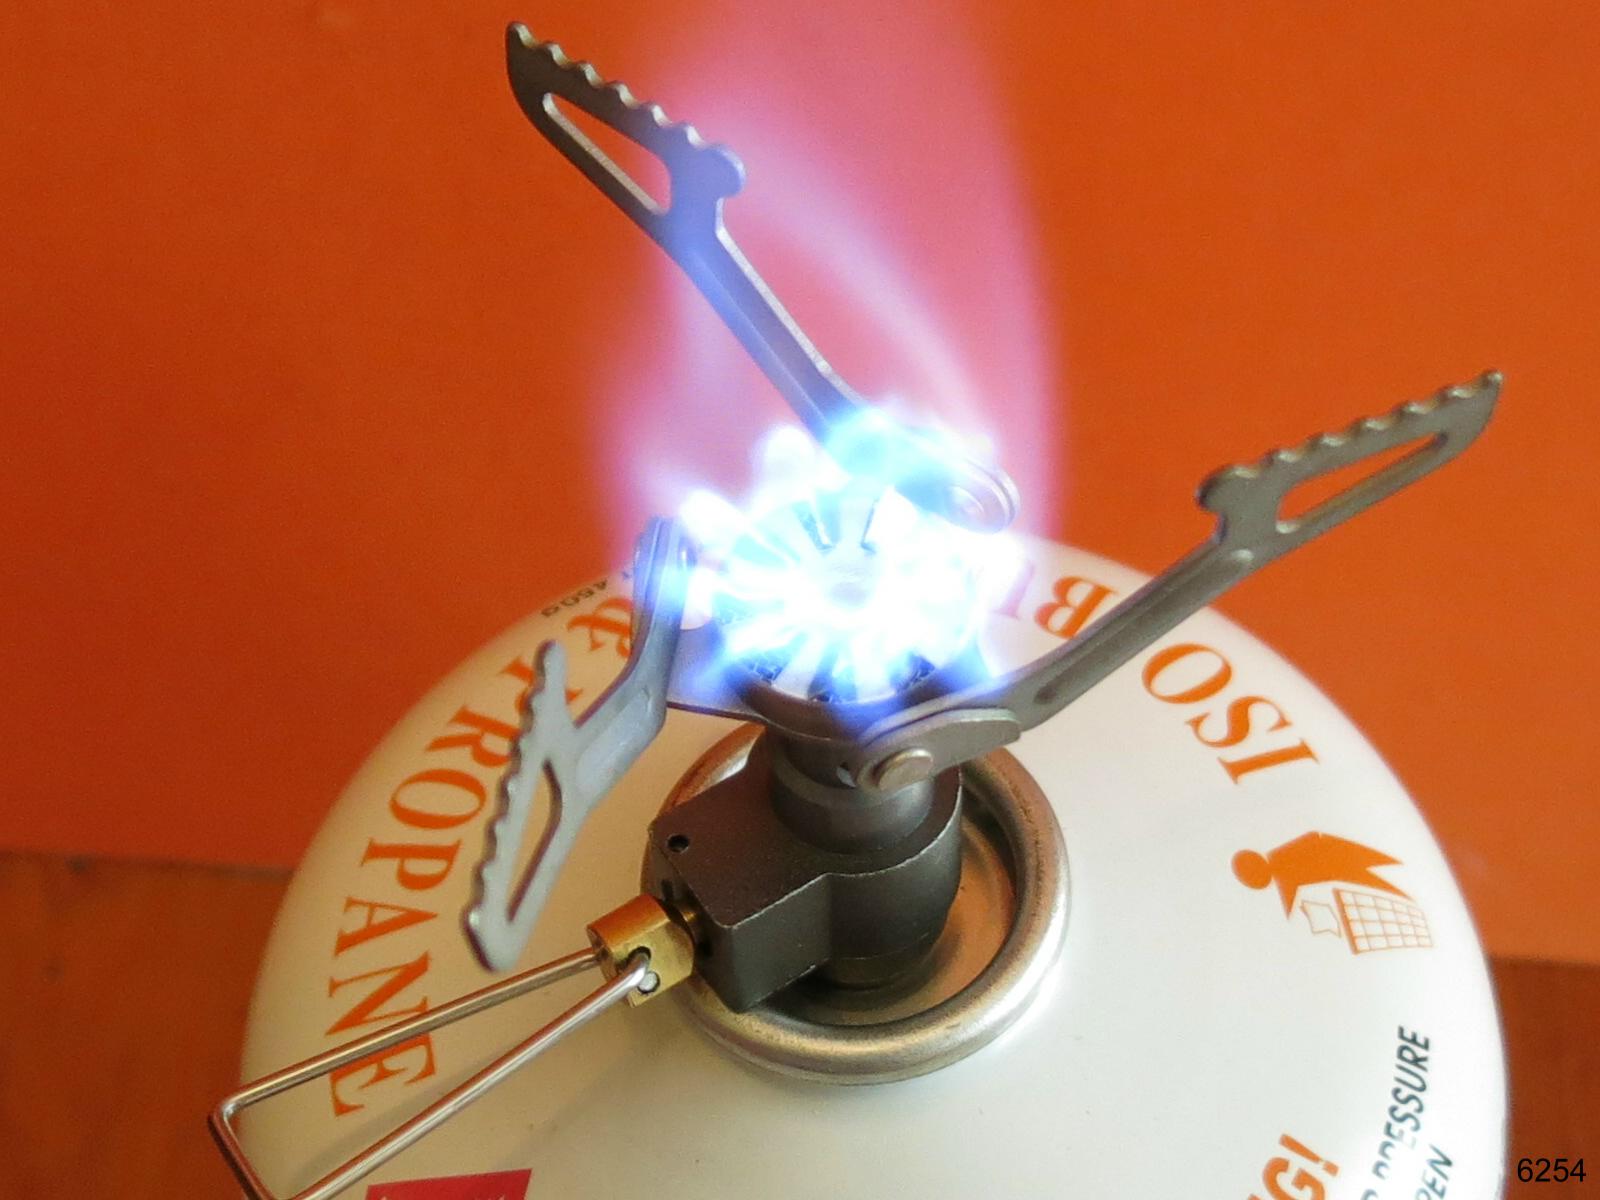 a close up of a metal object with a flame coming out of it